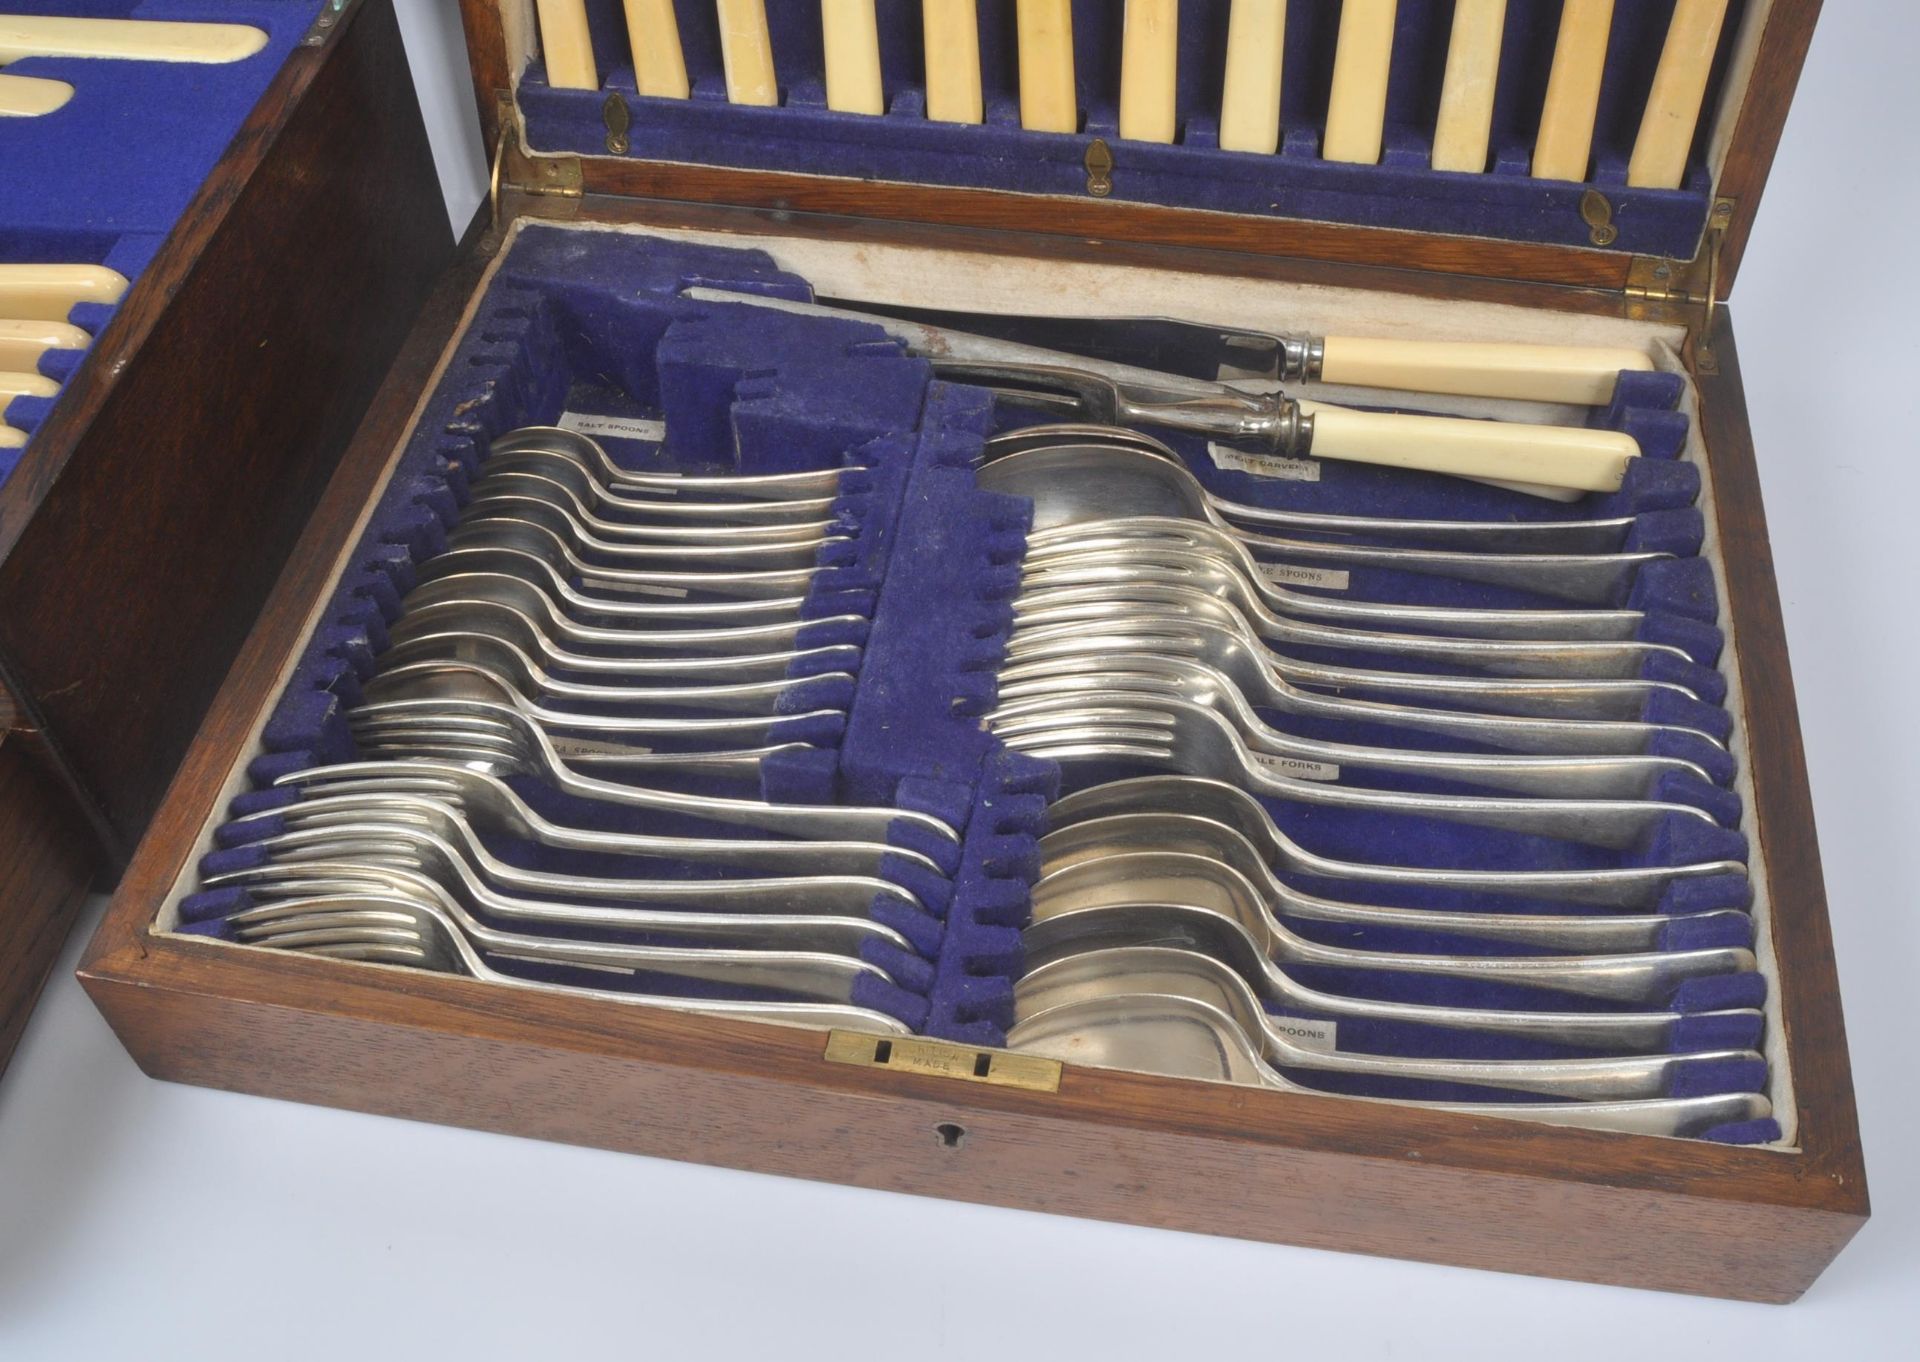 FIRTHS & GILPIN LTD - TWO 1920S CUTLERY CANTEENS - Image 3 of 7